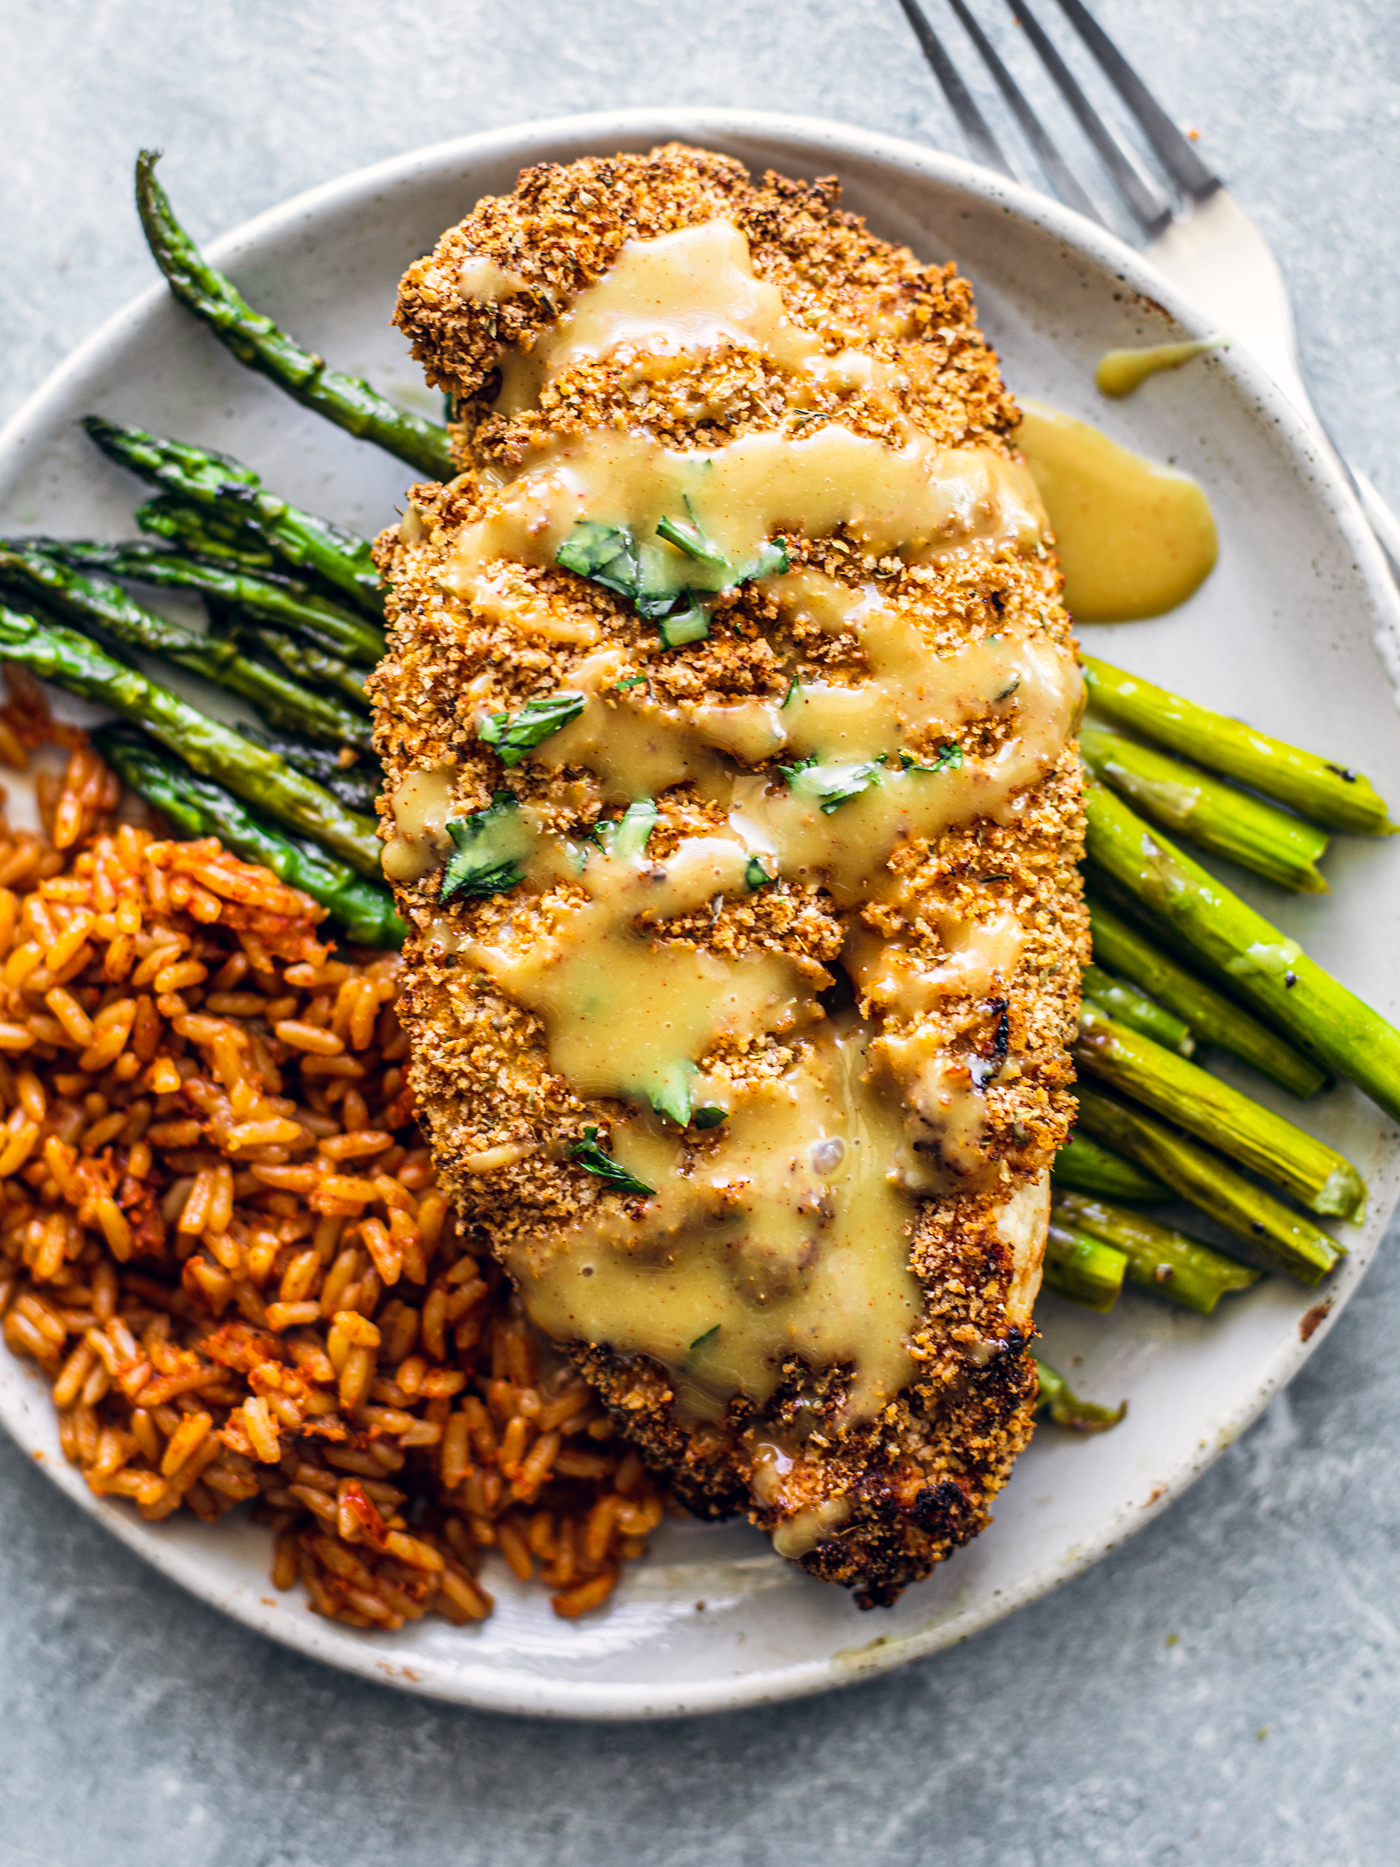 Crispy chicken cutlet on a bed of red rice and asparagus.